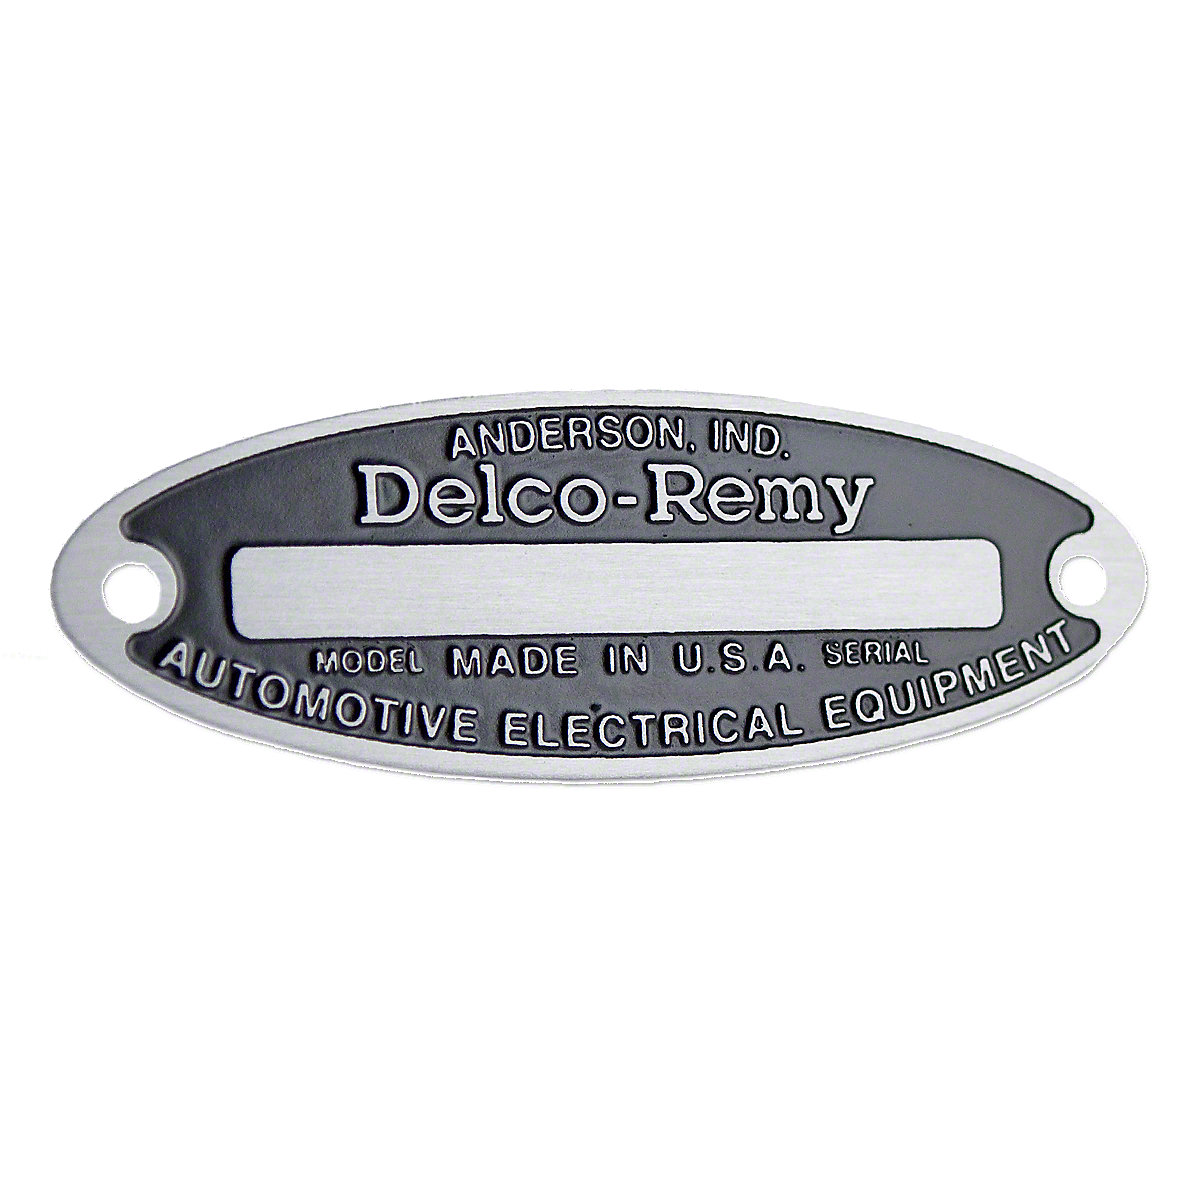 Blank Delco Remy Generator Tag For Massey Harris And Massey Ferguson Tractors.